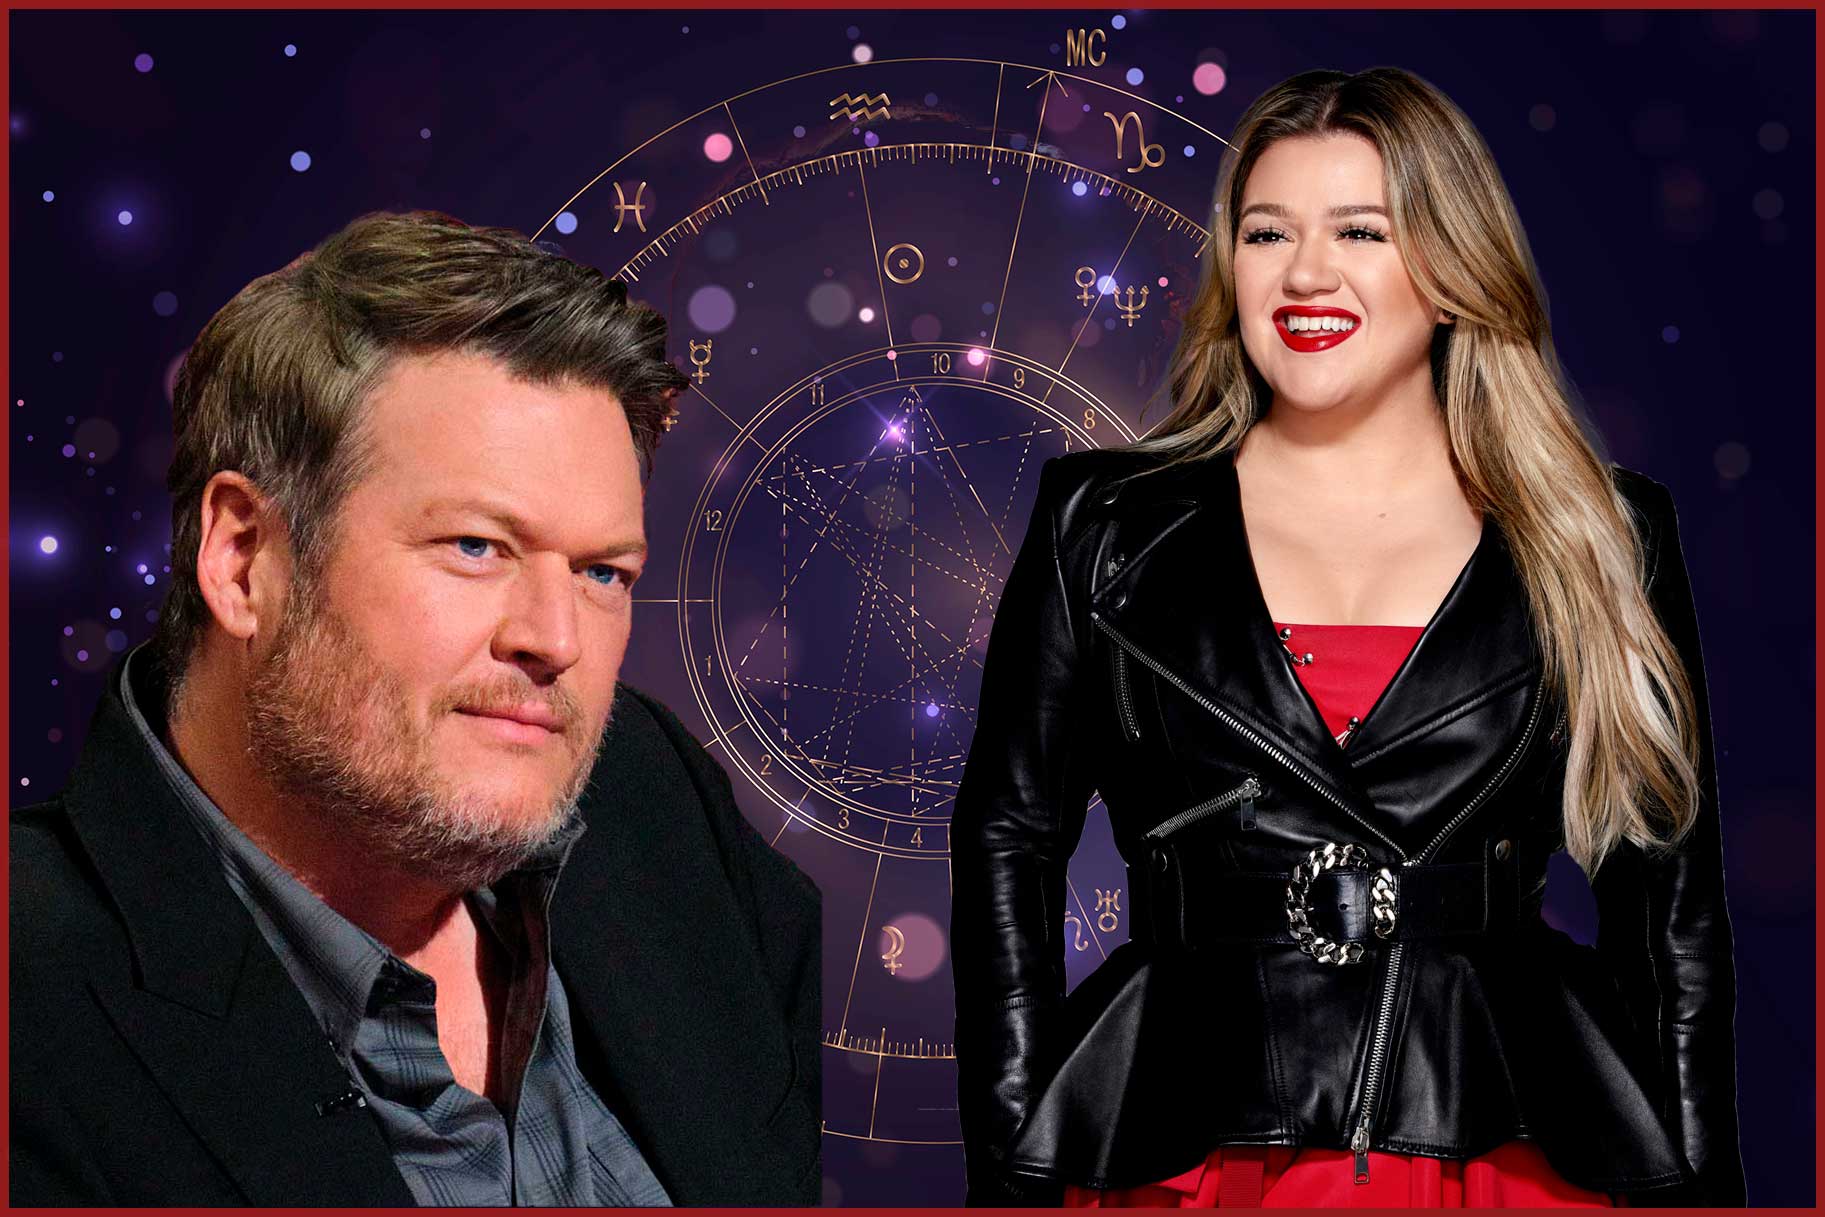 Cut out images of Blake Shelton and Kelly Clarkson against a natal chart.